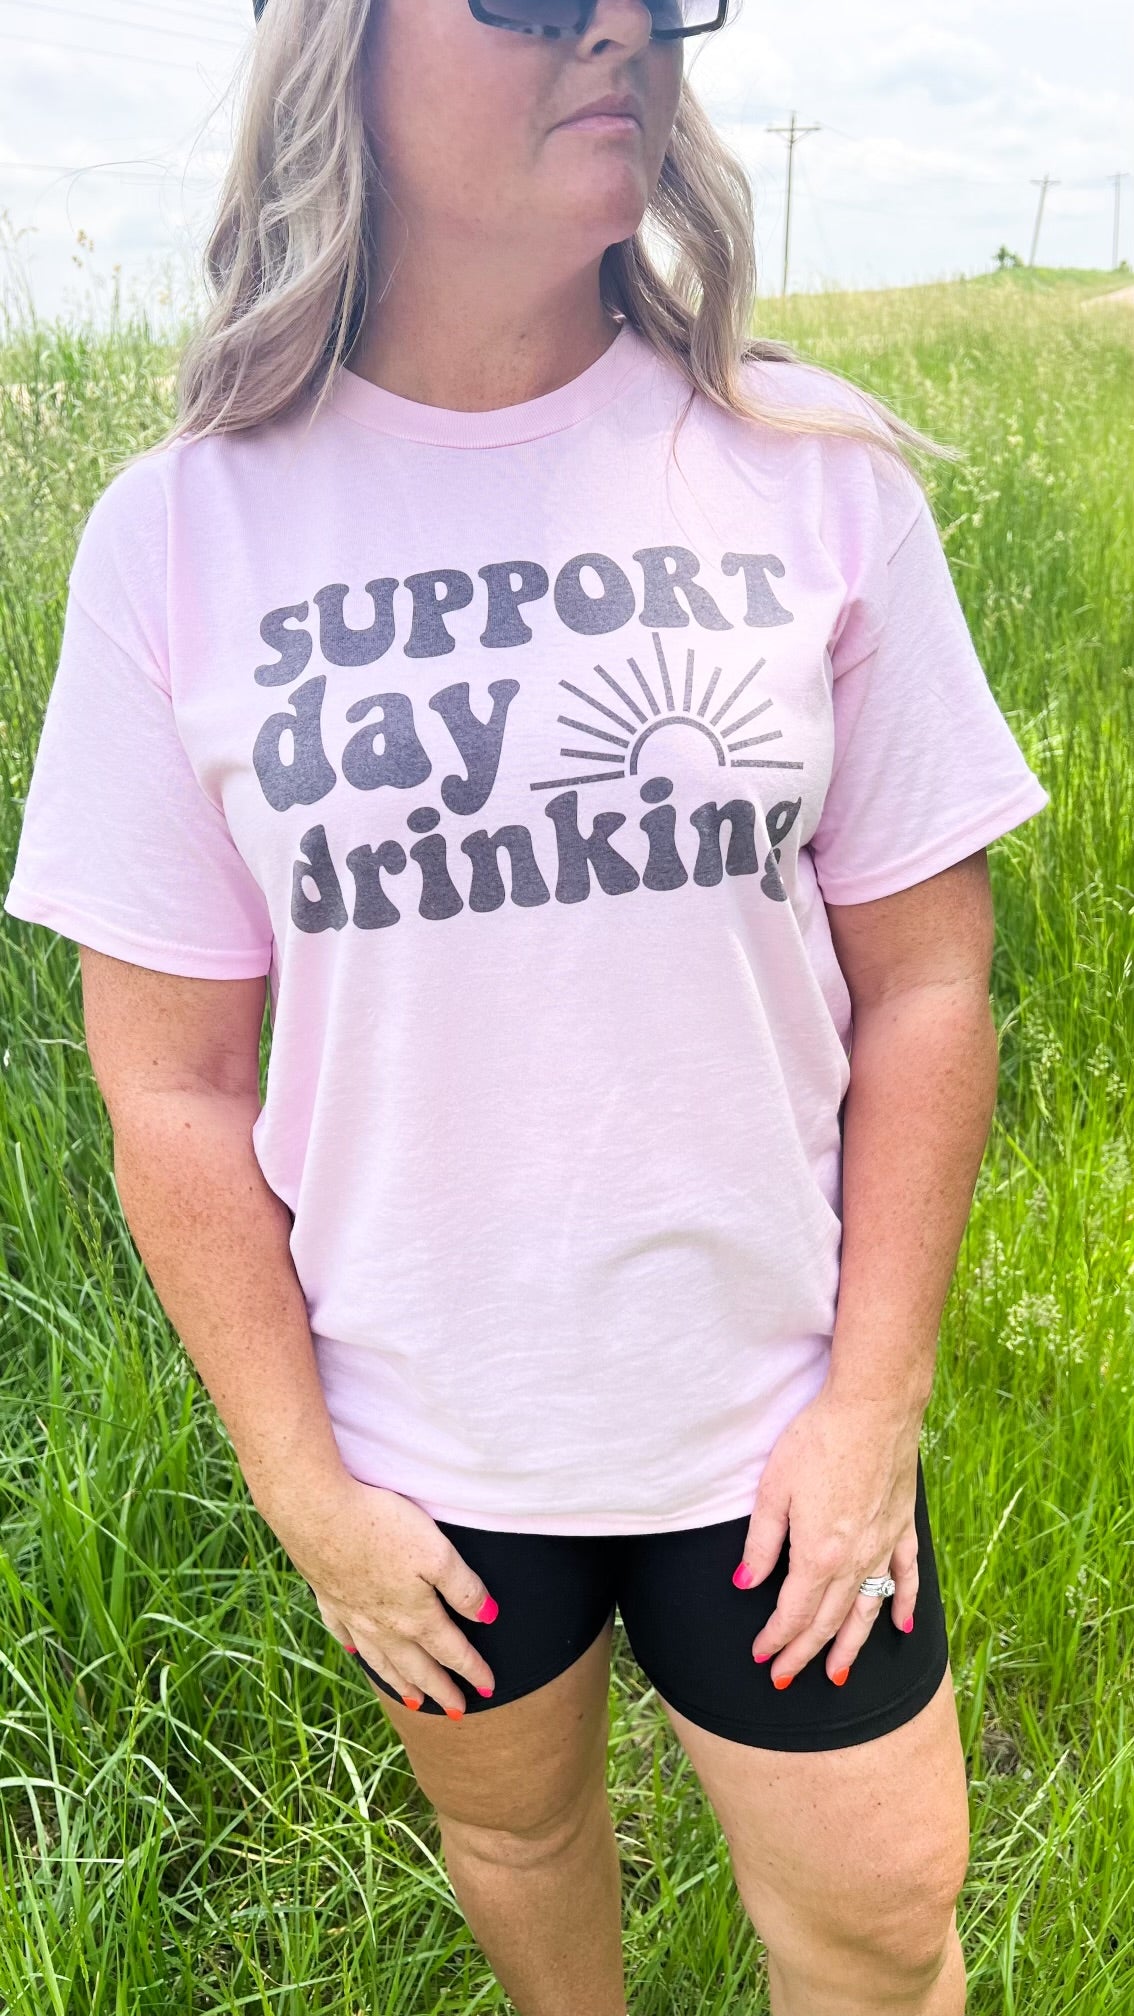 Support Day Drinking Graphic